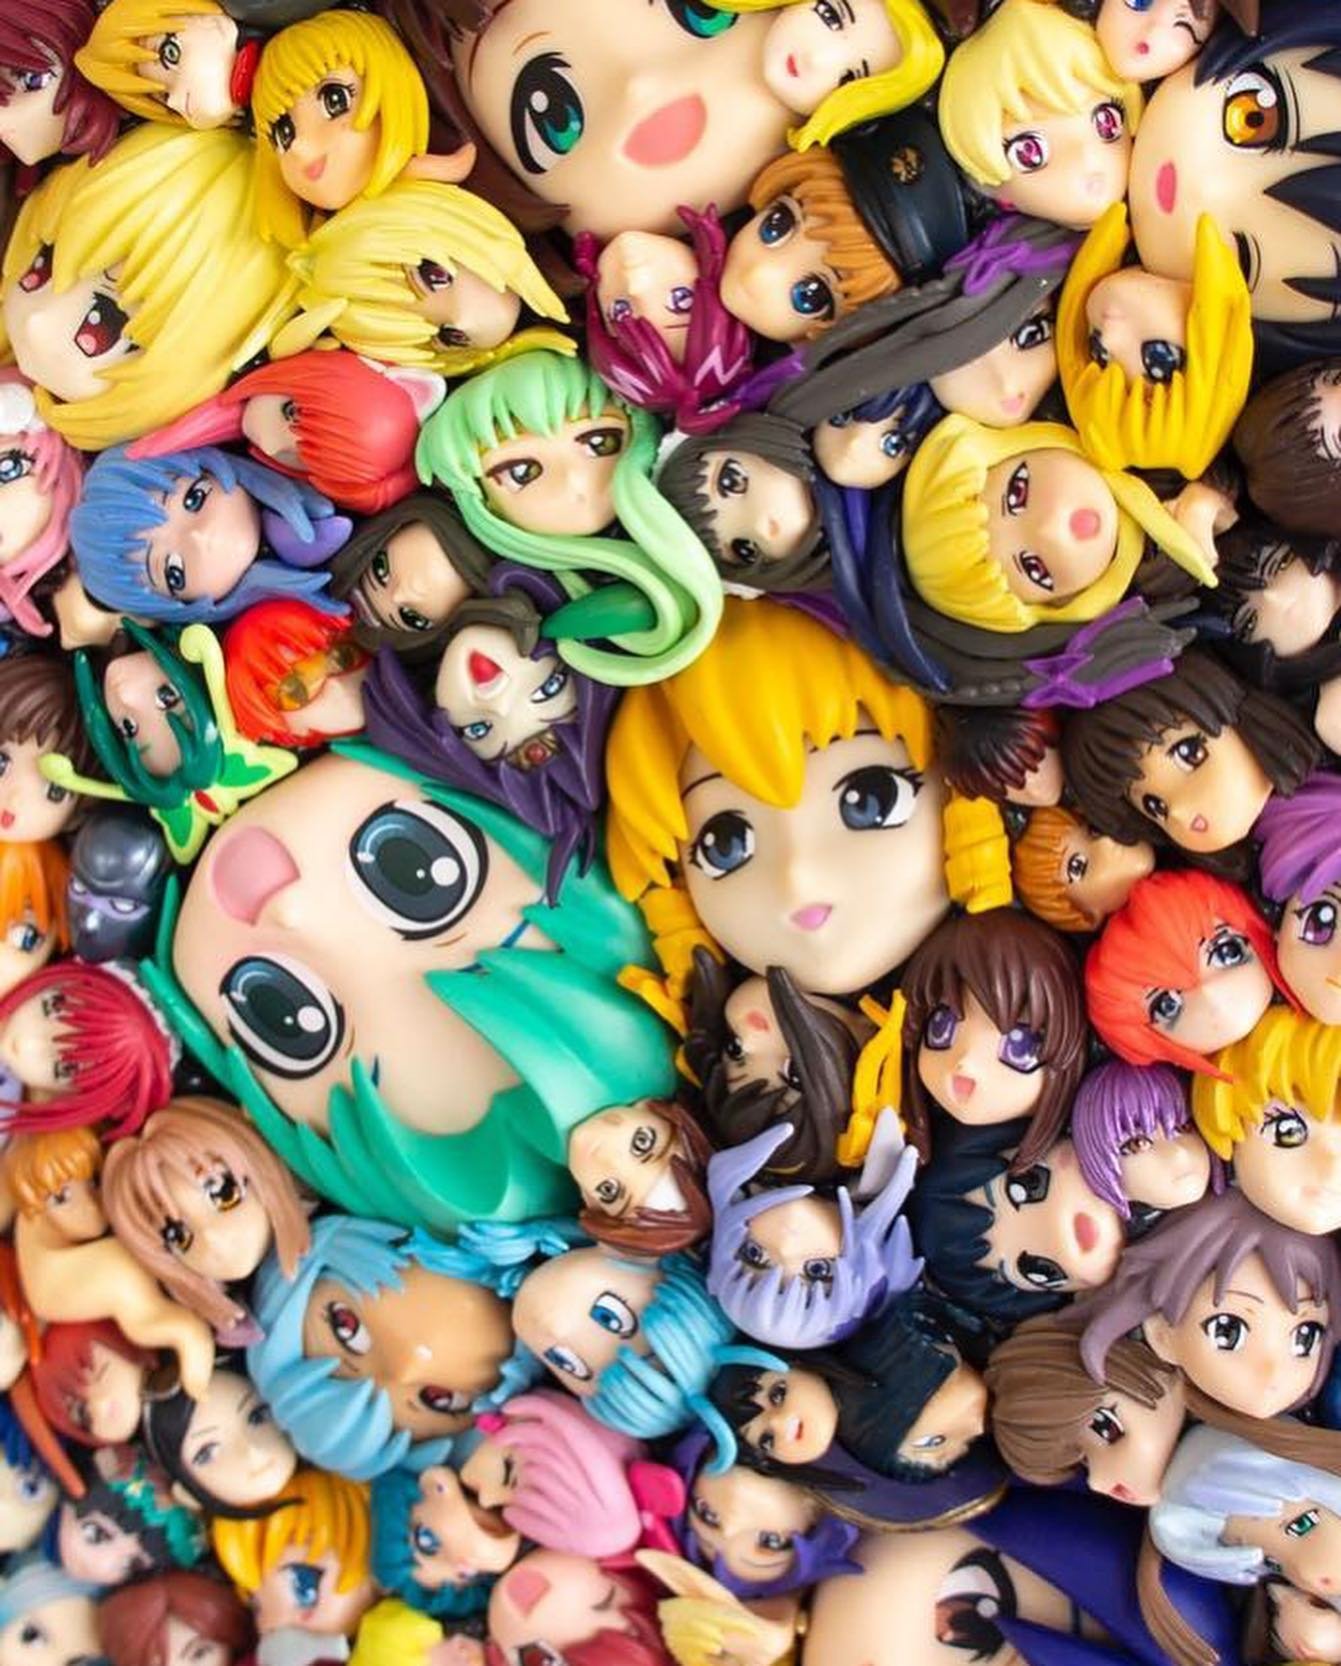 Meet The Collective That is Melting Anime Culture into Art — sabukaru